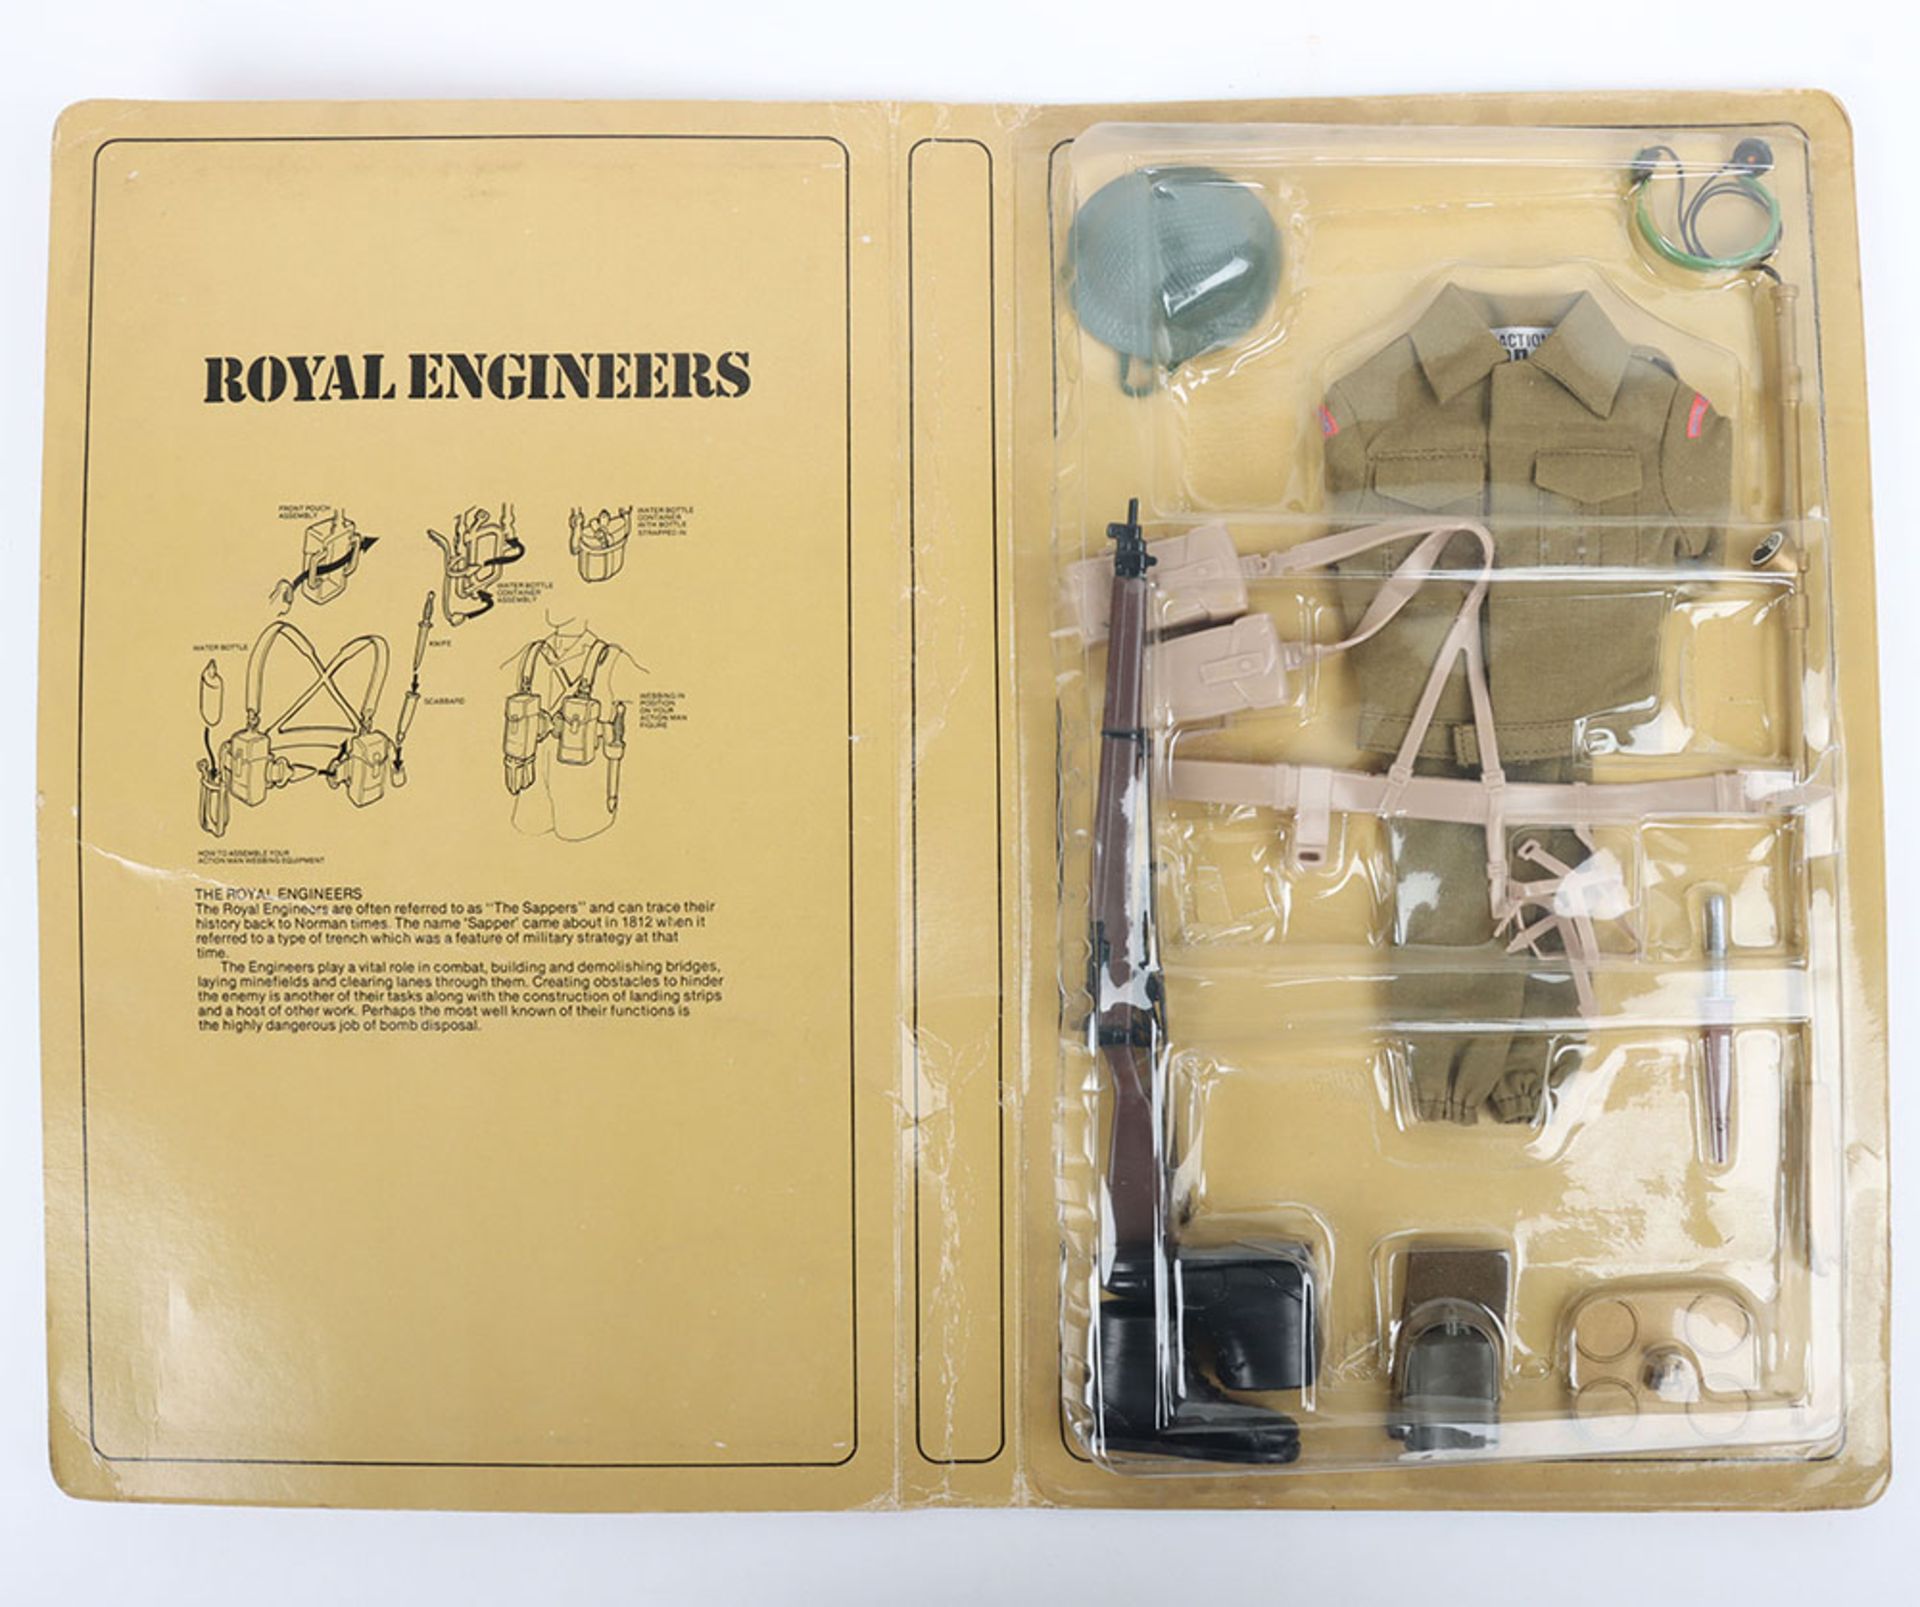 Vintage Action Man The Soldiers Royal Engineers Outfit circa 1980 in Book Card - Image 2 of 5